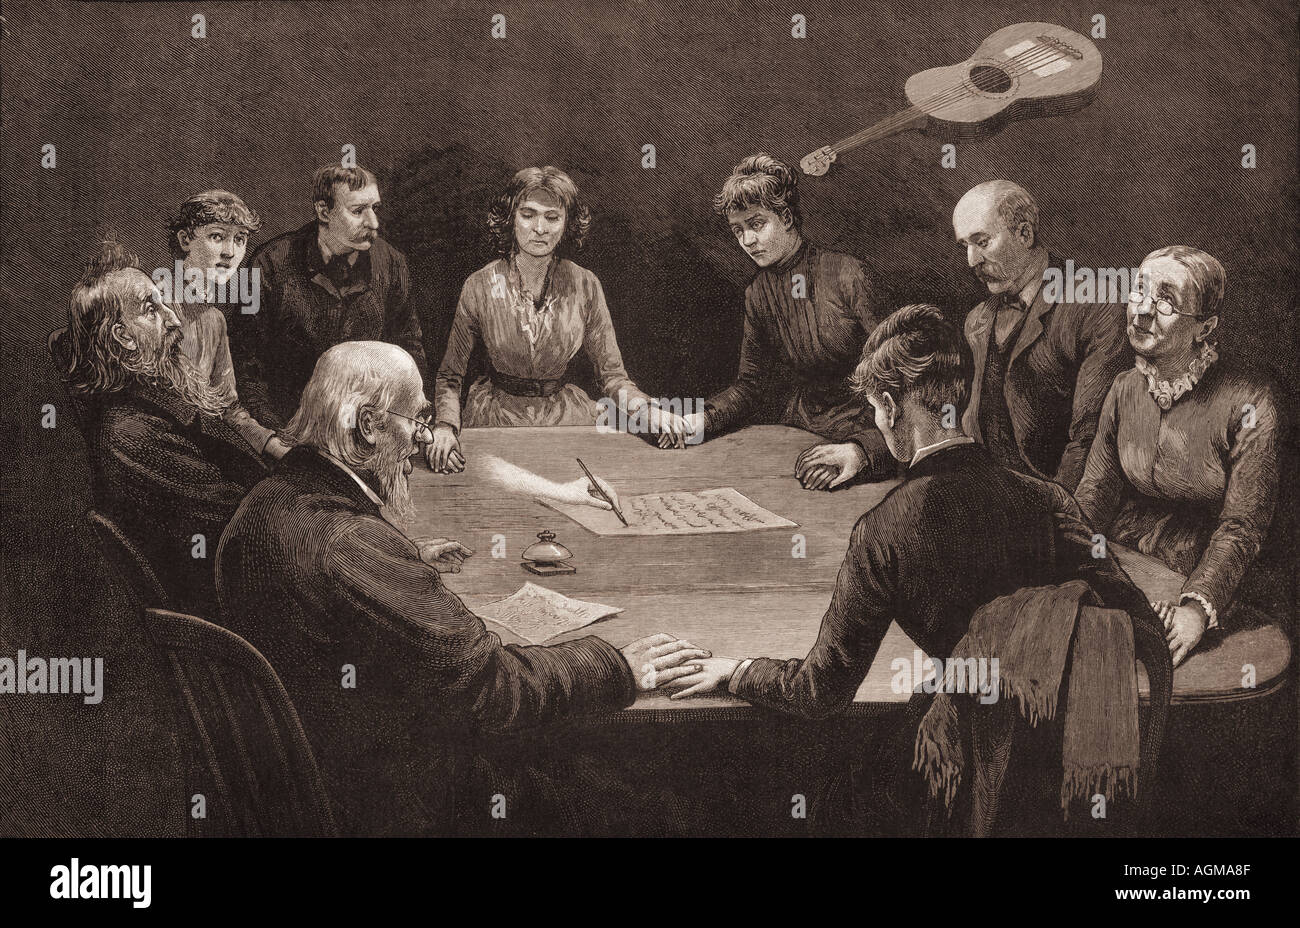 People at a seance appear to experience a guitar floating above their heads and a ghostly hand writing on paper, circa 1887. Stock Photo